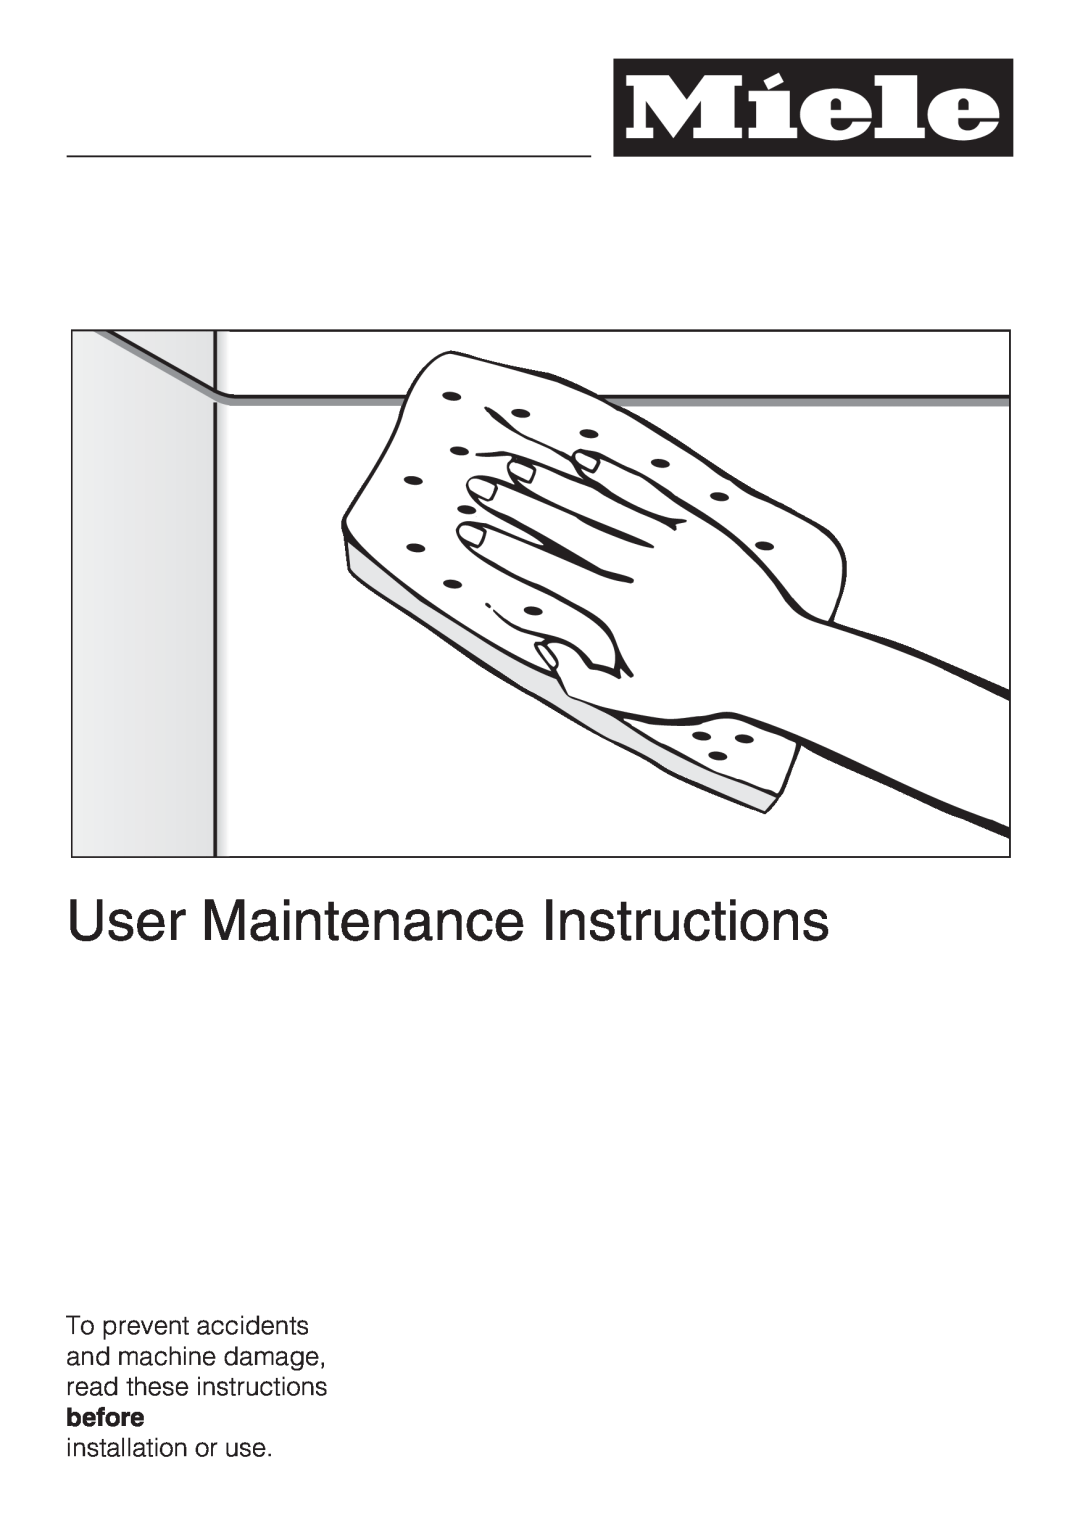 Miele G 5605, G 5600 manual User Maintenance Instructions, installation or use 